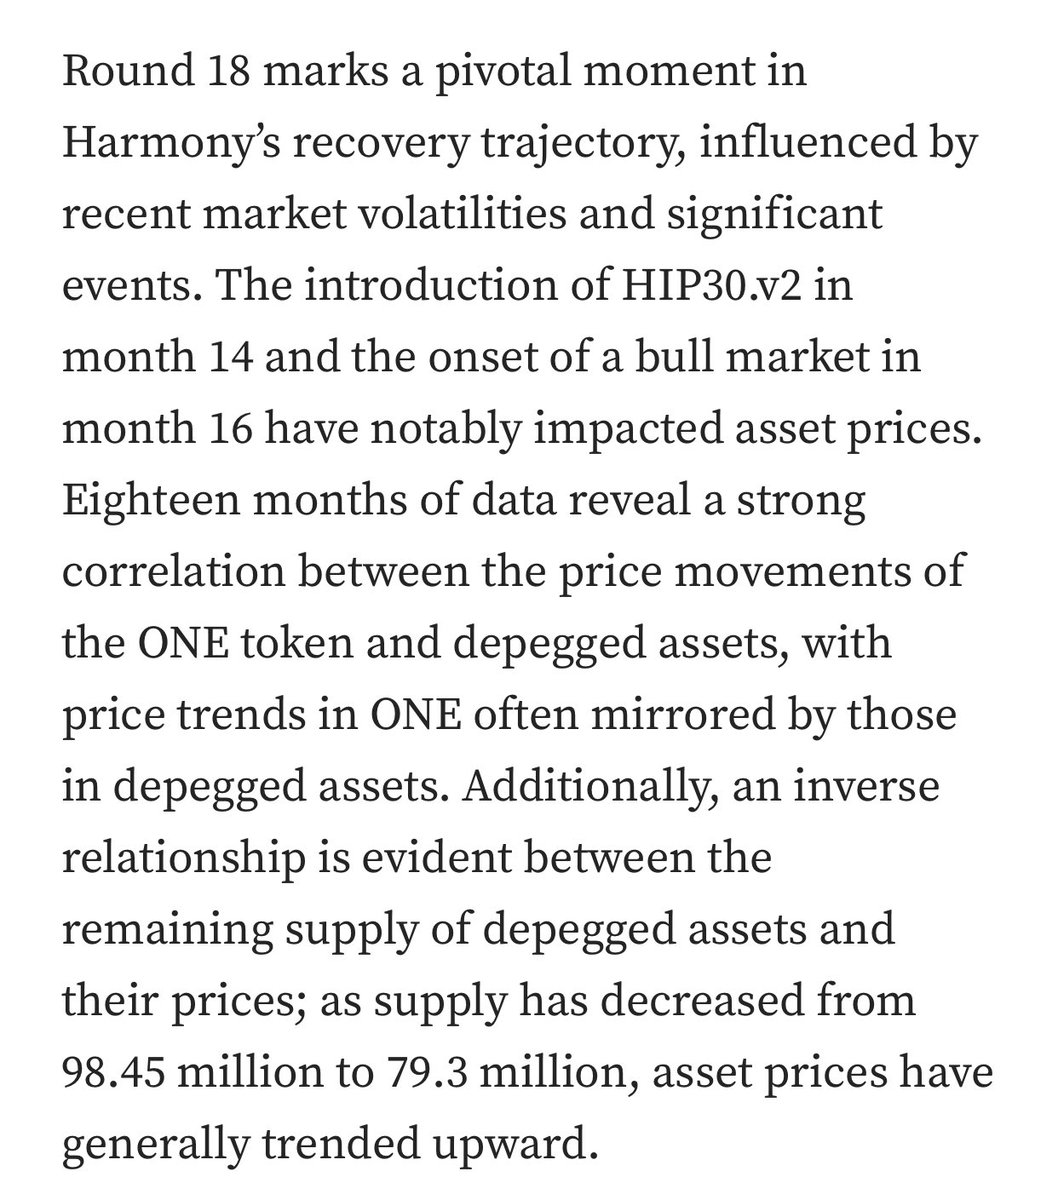 🚨 @harmonyprotocol / @recoveryonefdn Round 18 marks a pivotal moment in Harmony’s recovery trajectory, influenced by recent market volatilities and significant events. ✅ The introduction of HIP30.v2 in month 14 and the onset of a bull market in month 16 have notably impacted…